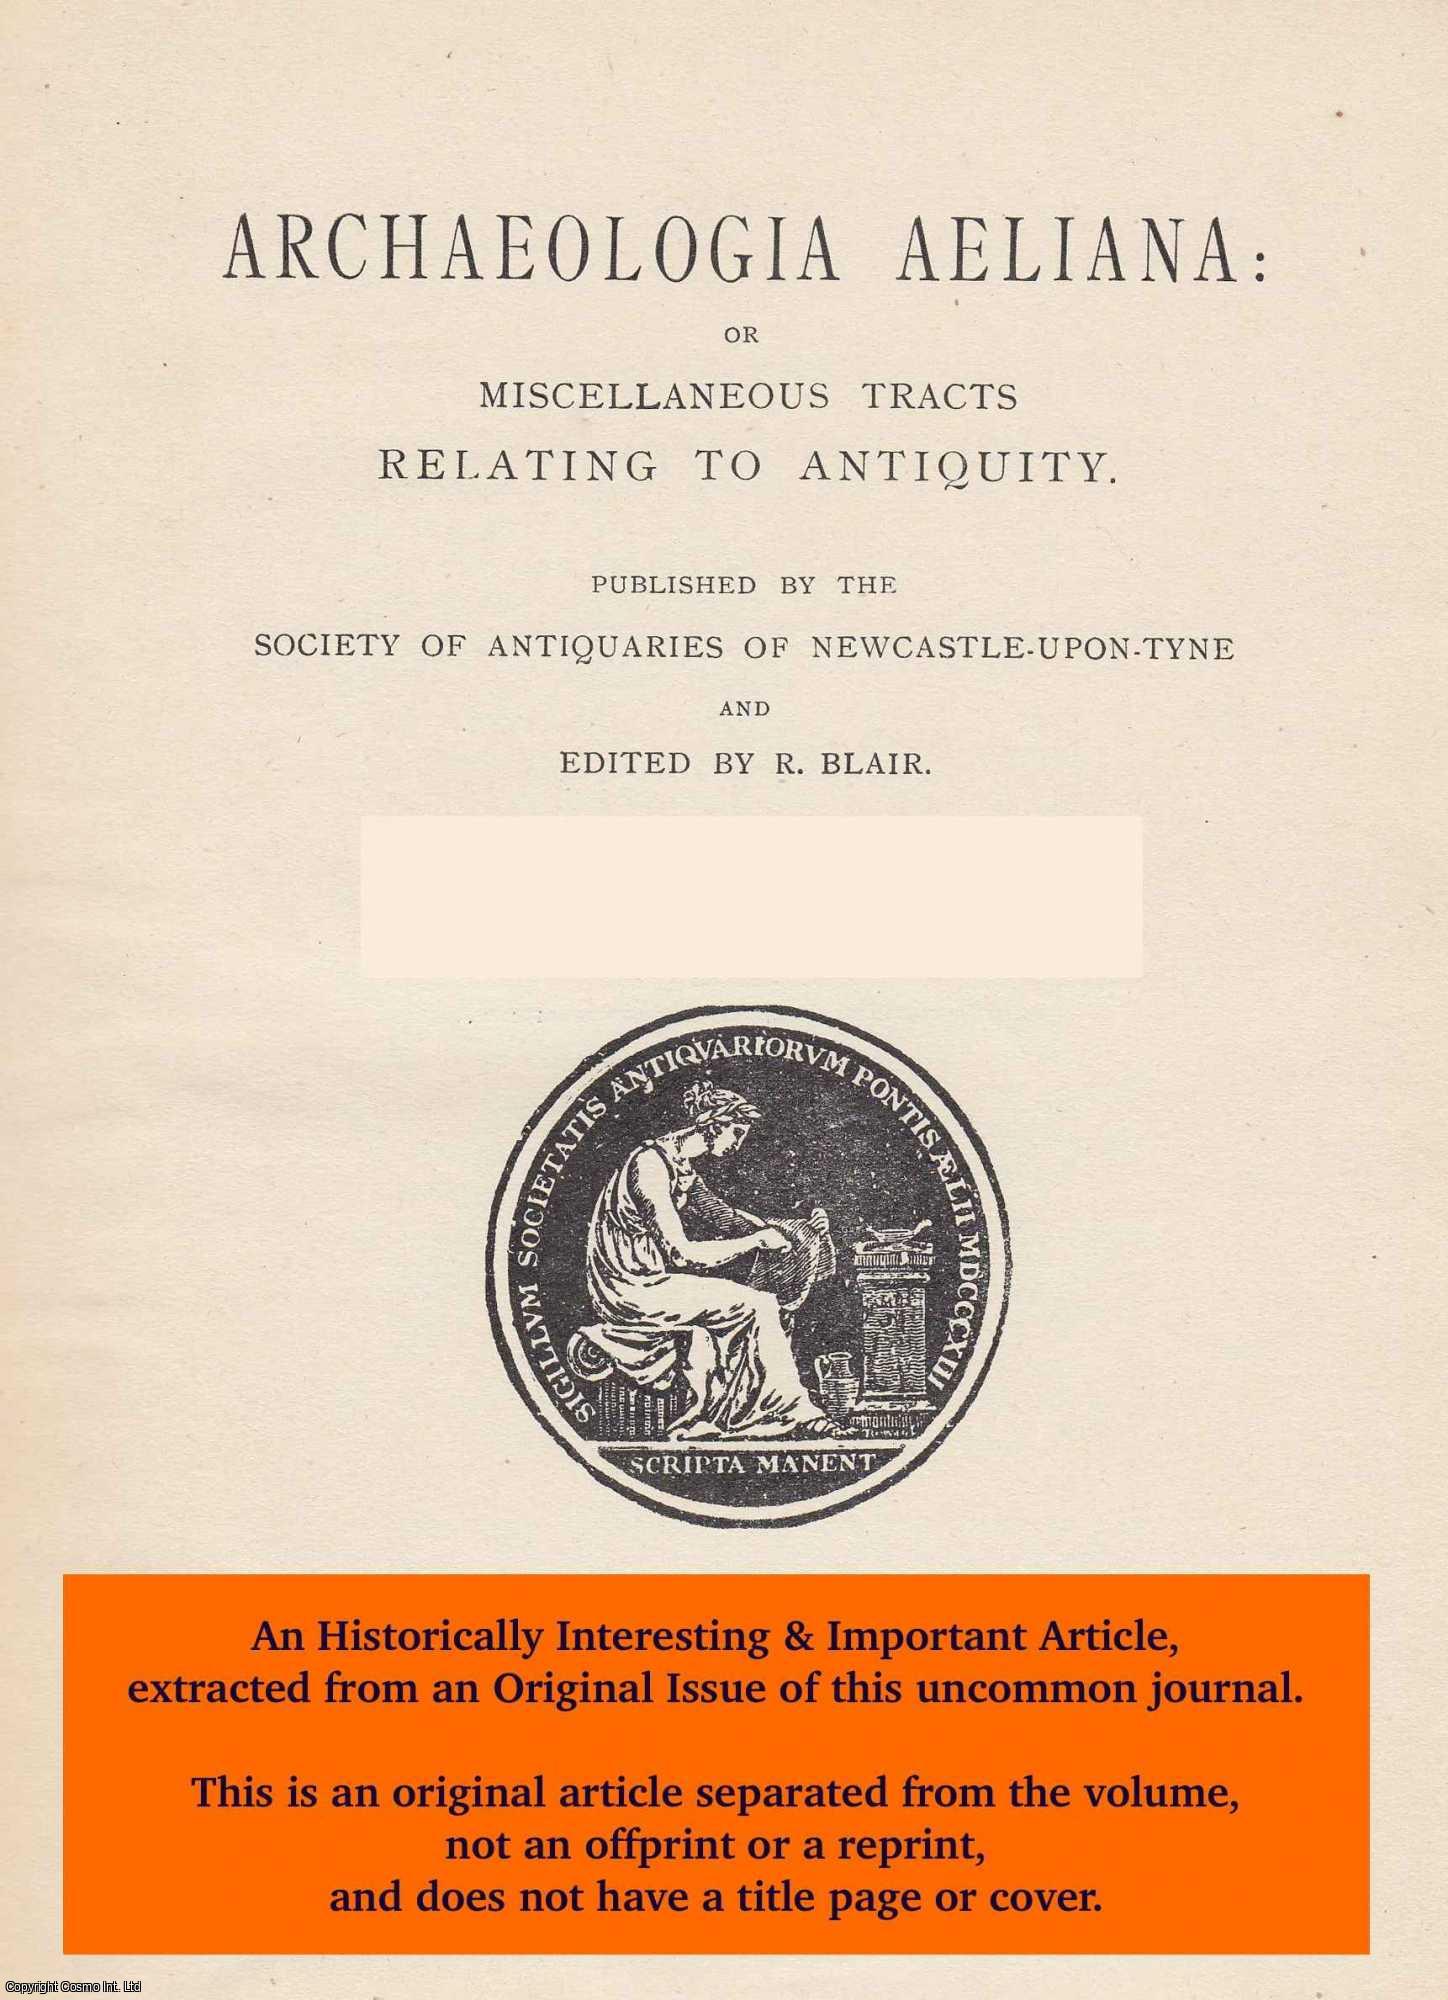 W. Douglas Simpson, W. Douglas - Haughton Castle. An original article from The Archaeologia Aeliana: or Miscellaneous Tracts Relating to Antiquity, 1951.